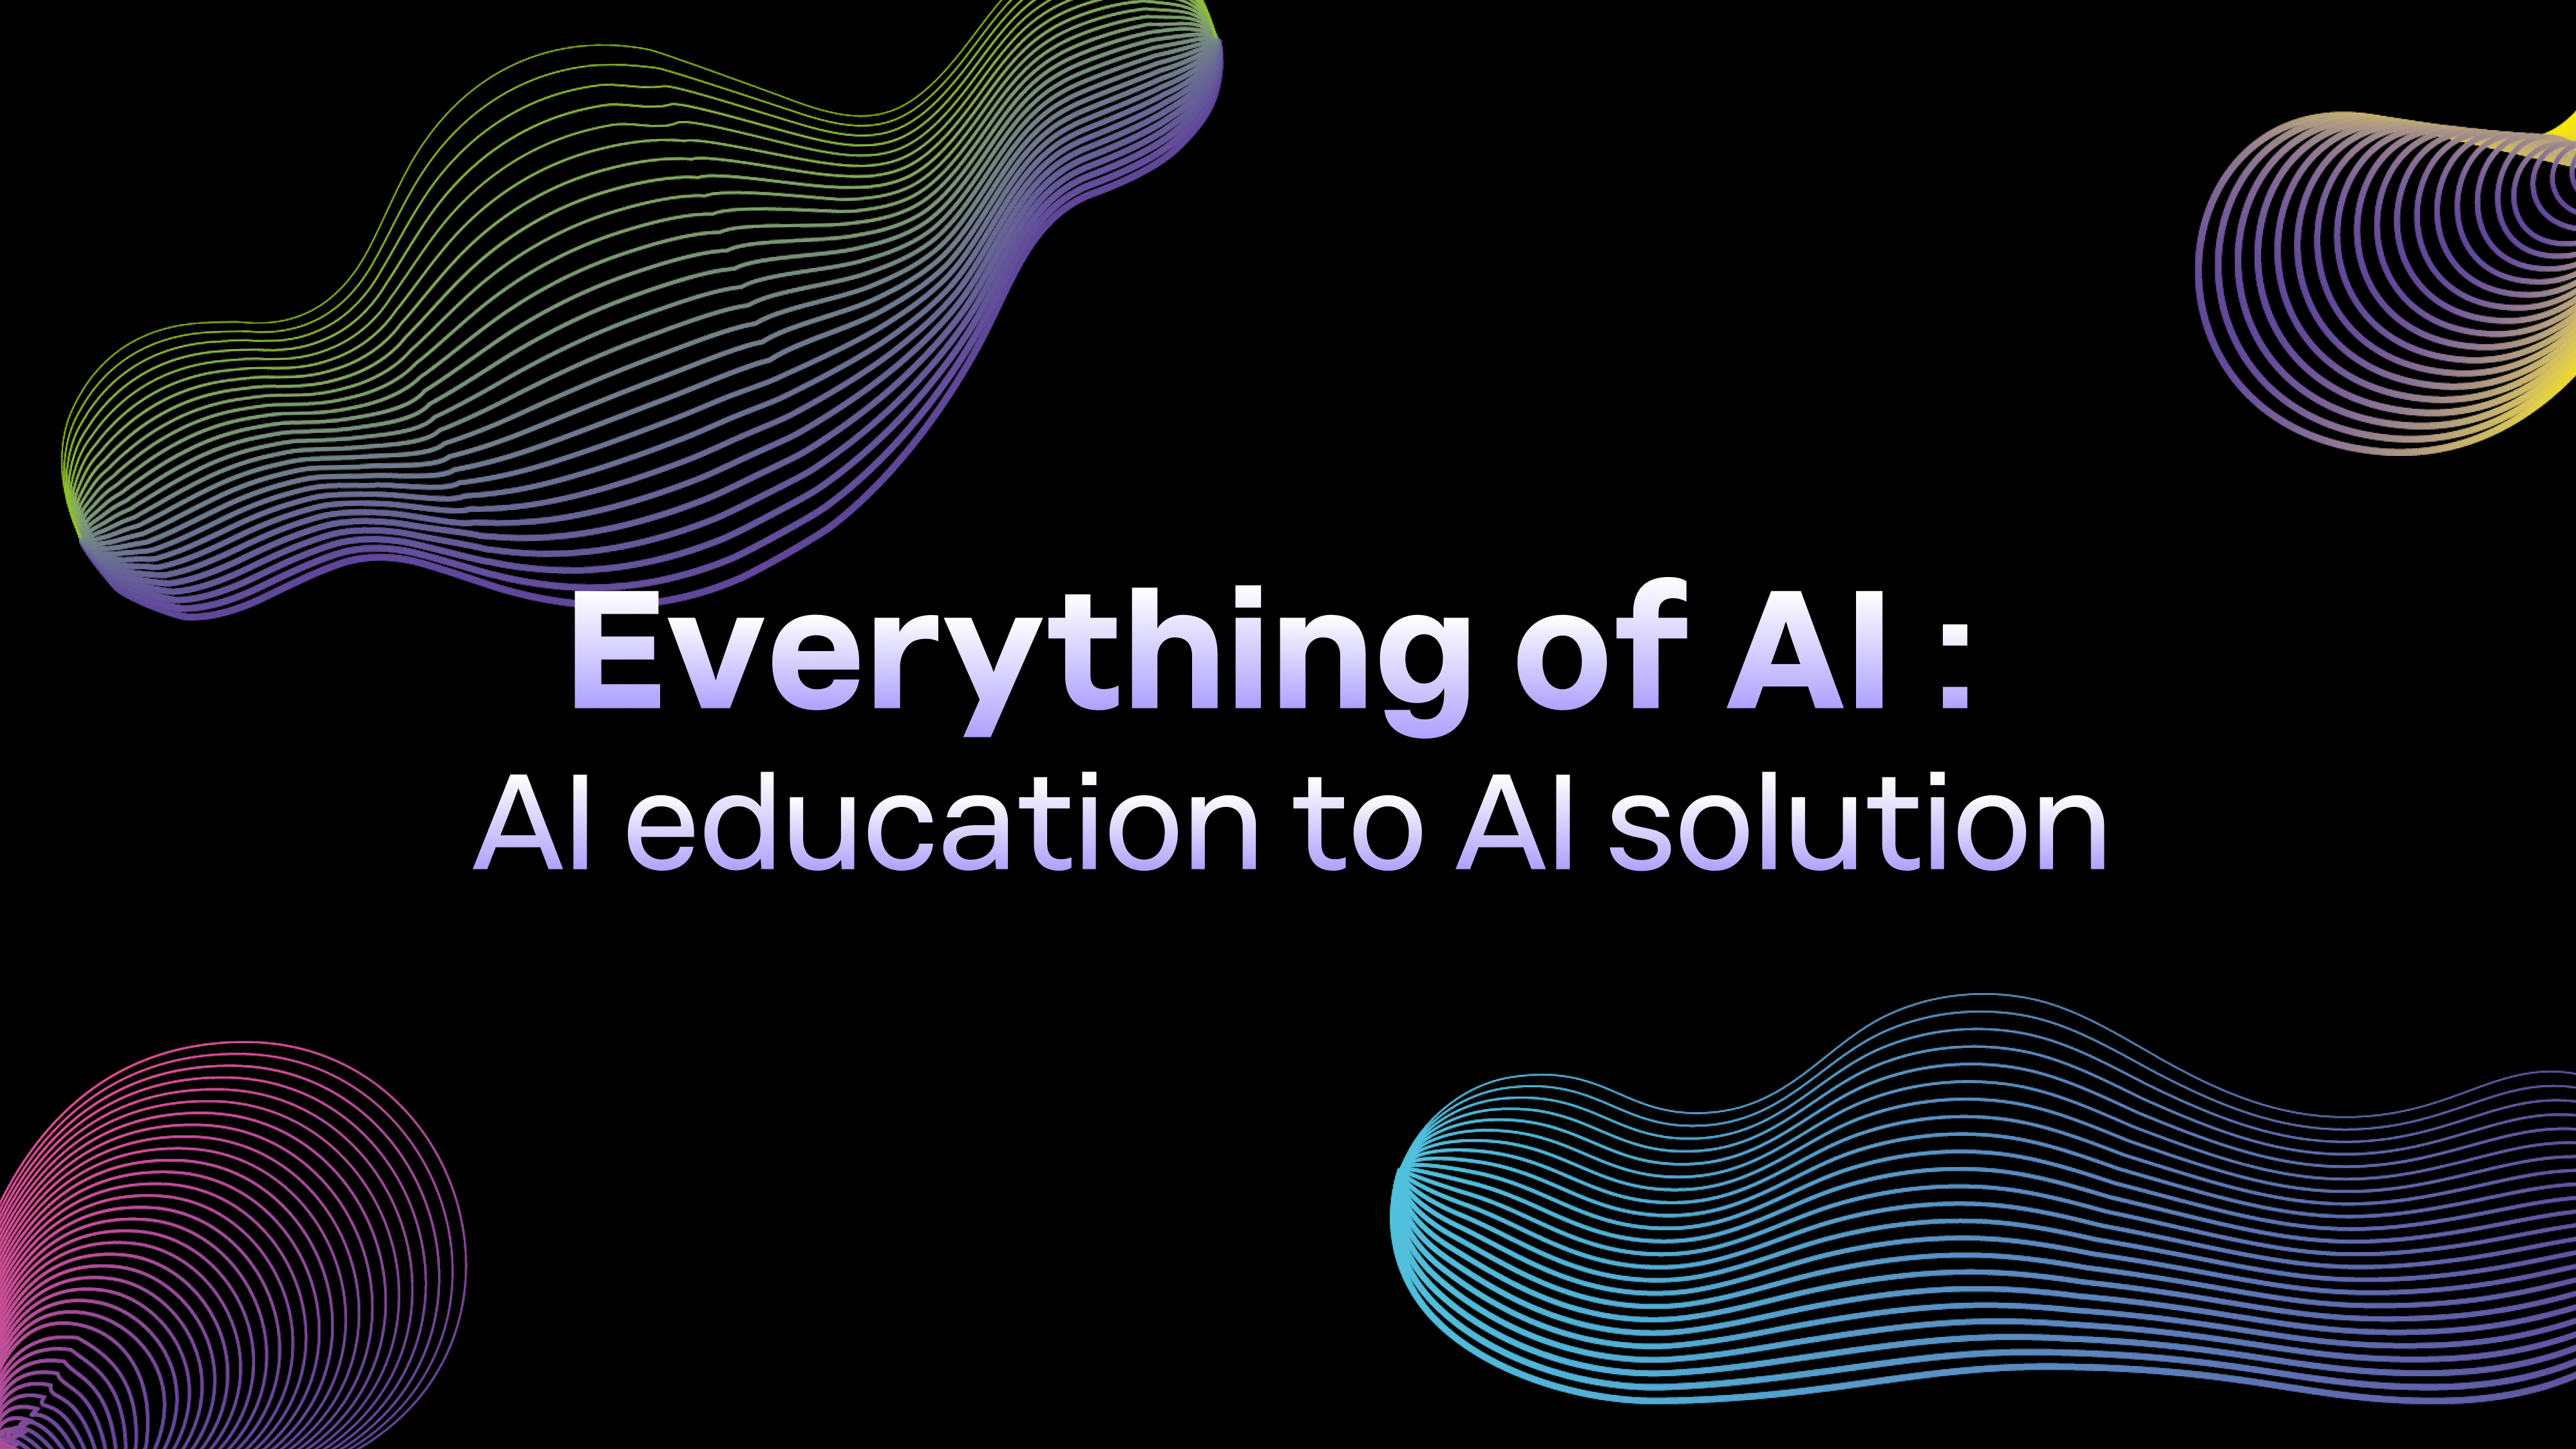 Elice Inc. leaps forward as an AI solution company through AI in all areas of infrastructure, platform, and content.